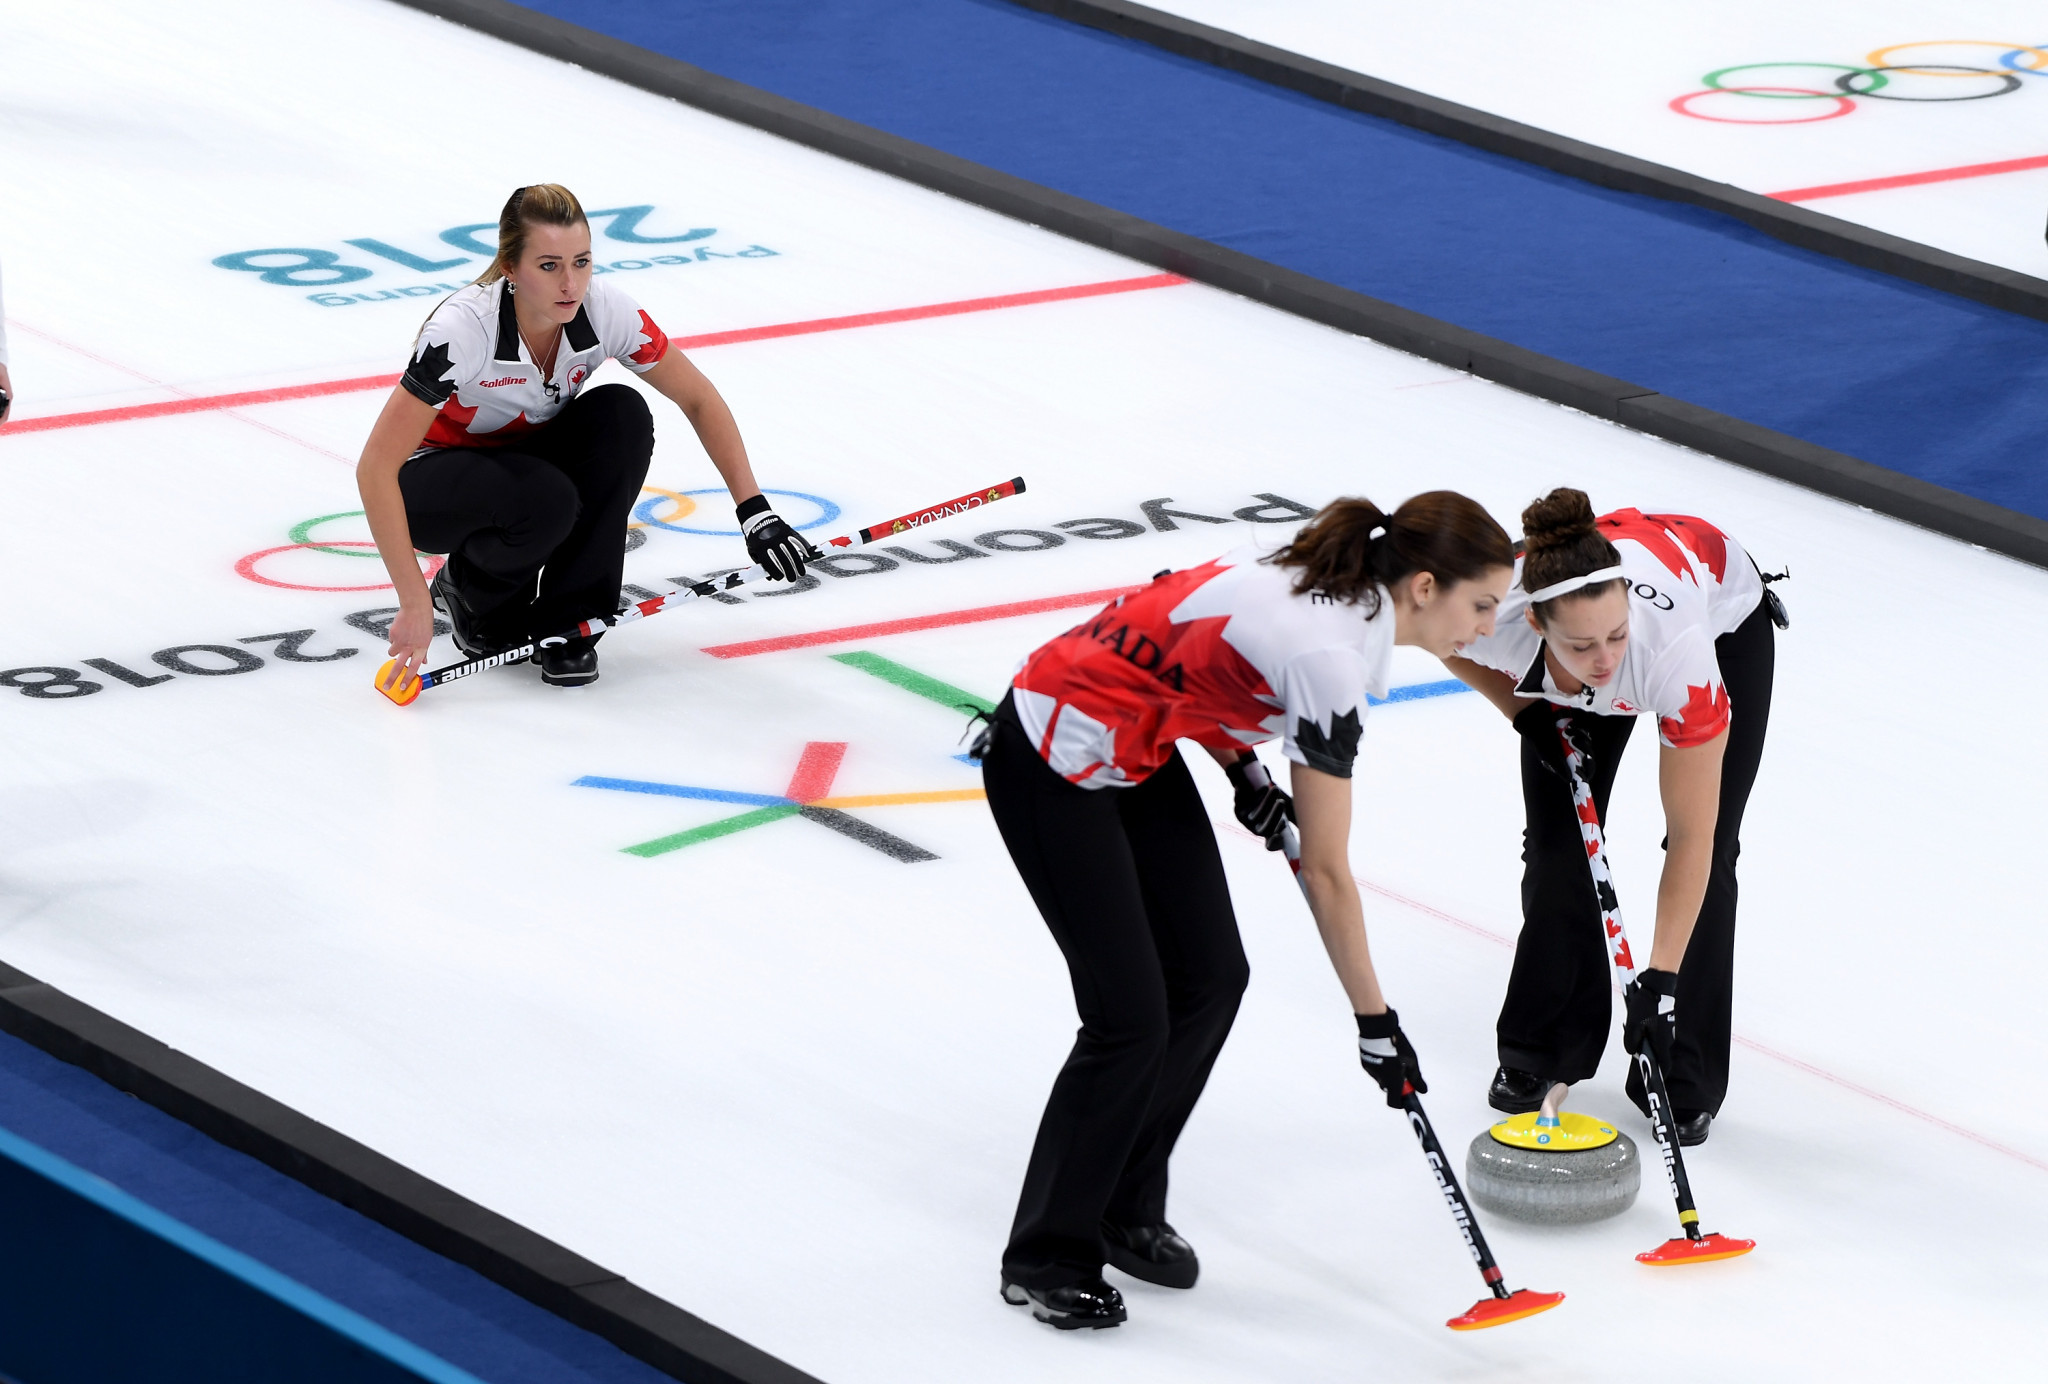 Curling Canada proposes sweeping changes in returntoplay guide